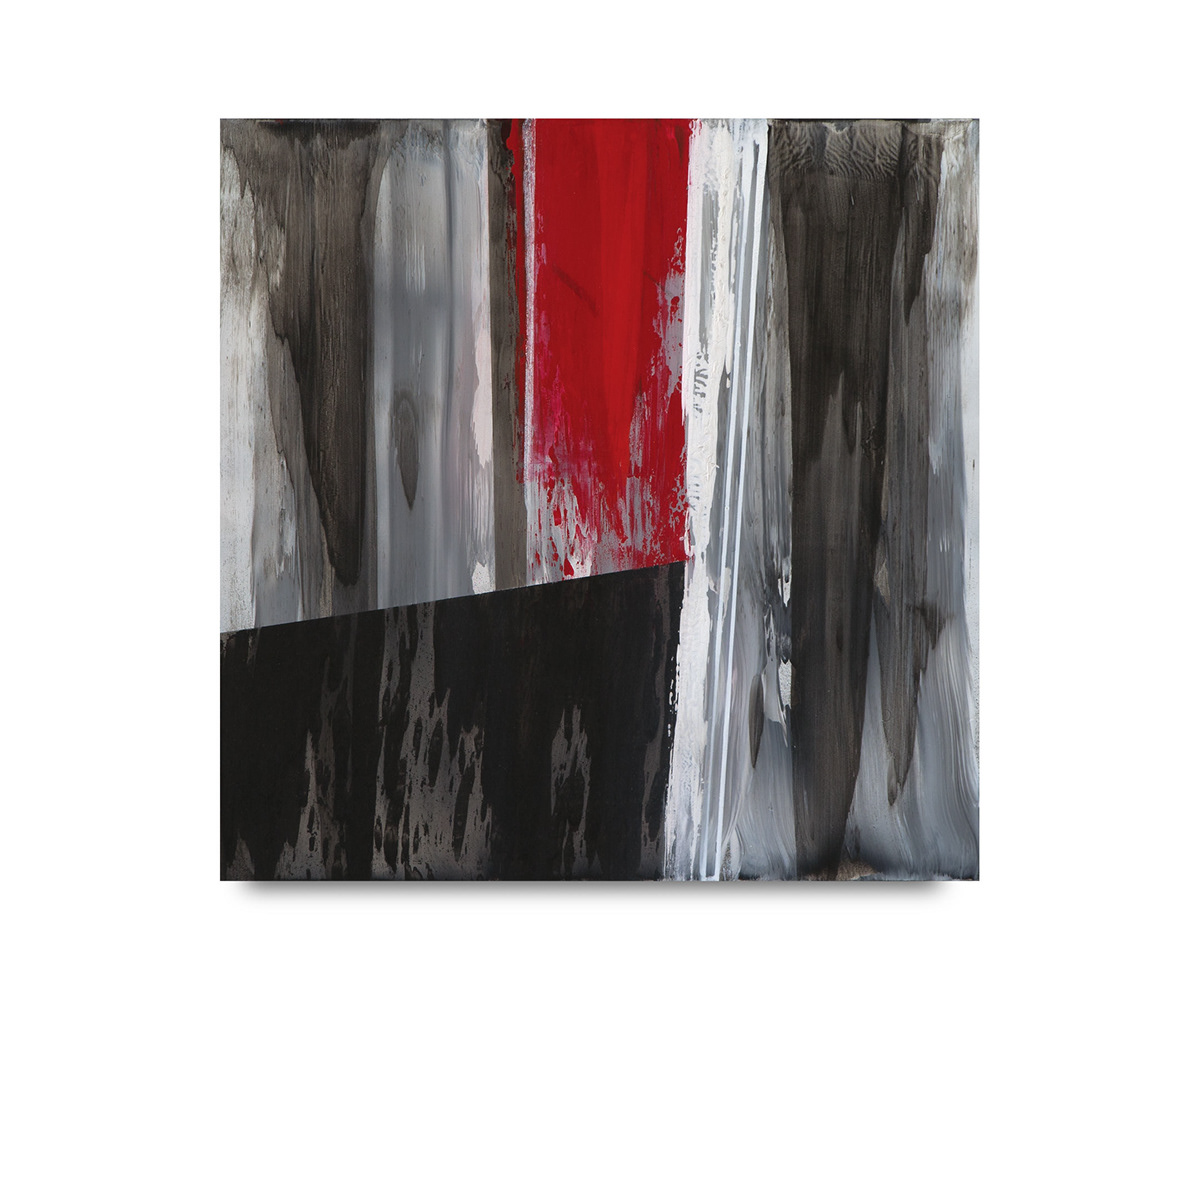 abstract Colorfield gestural Expressionism meditative Minimalism brooding Moody Black&white red conceptual contrast abstract painting Colorfield painting